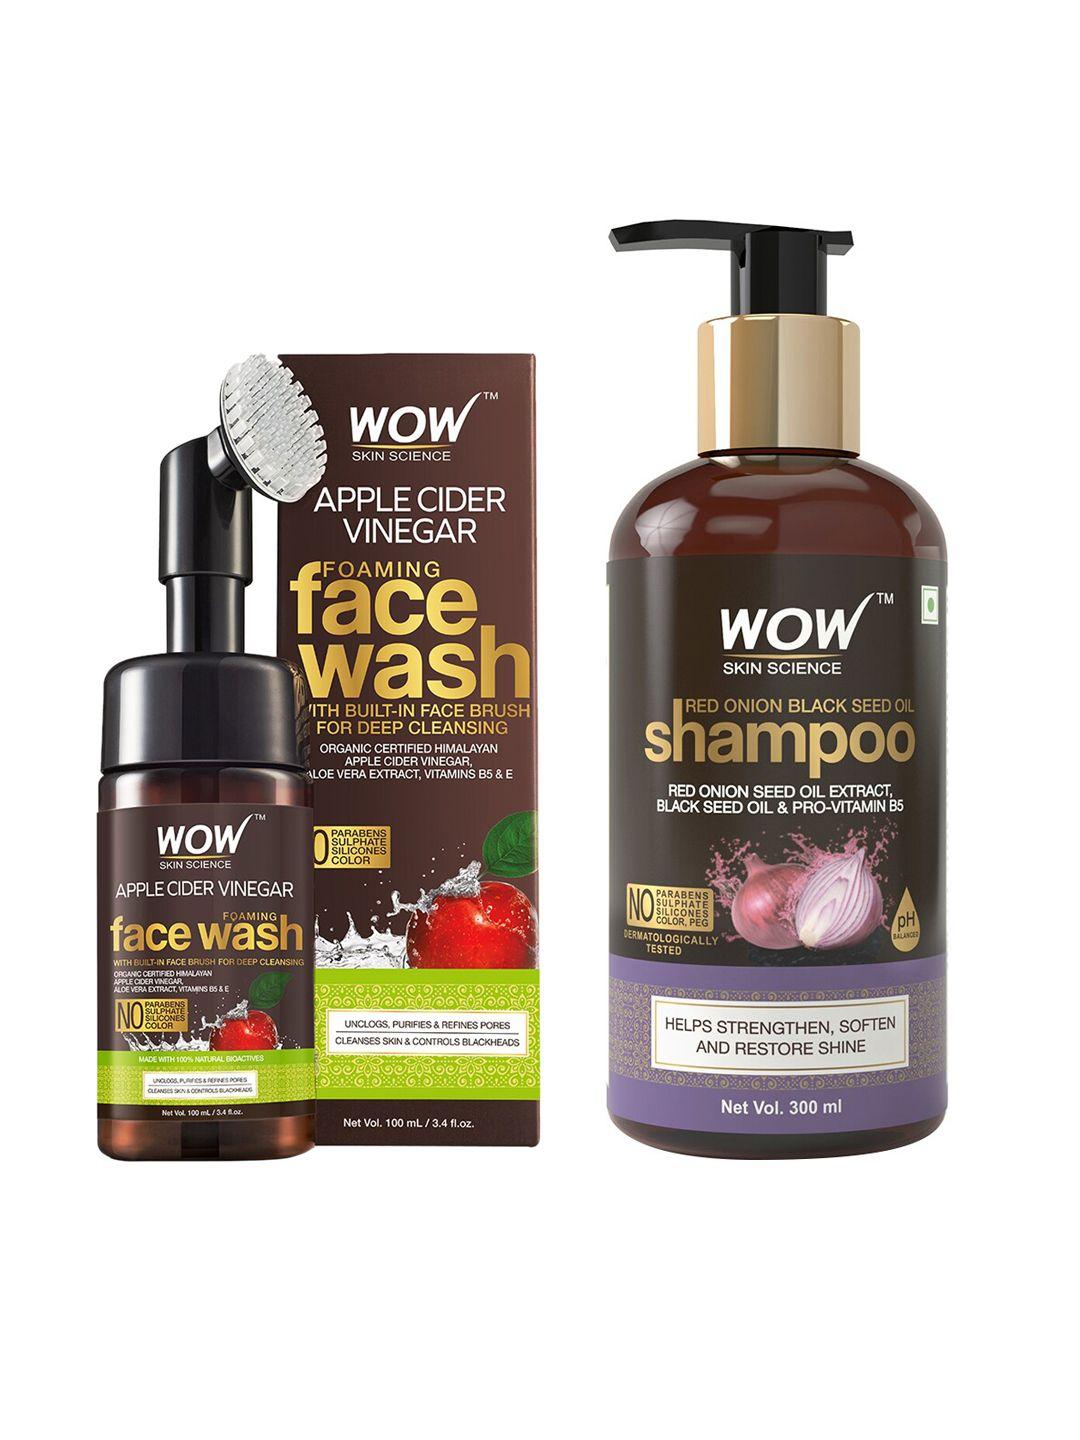 wow skin science set of shampoo & face wash with built-in brush